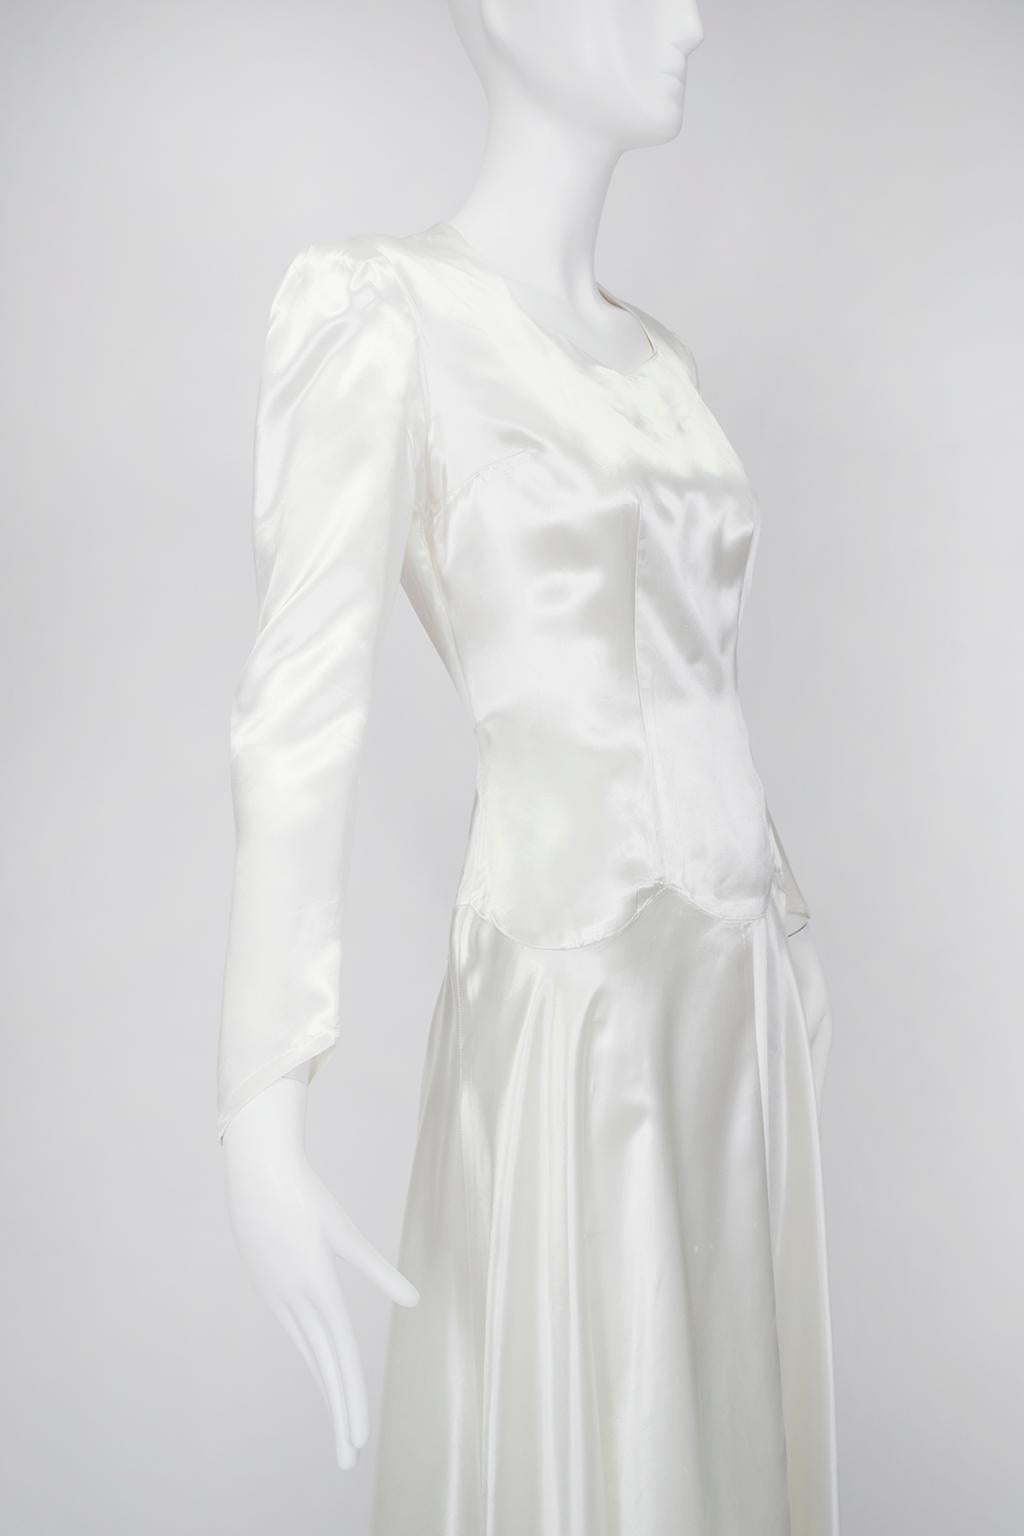 Minimalist Ivory Lacquered Satin Ankle Length Sweetheart Wedding Gown – M, 1940s In Good Condition For Sale In Tucson, AZ